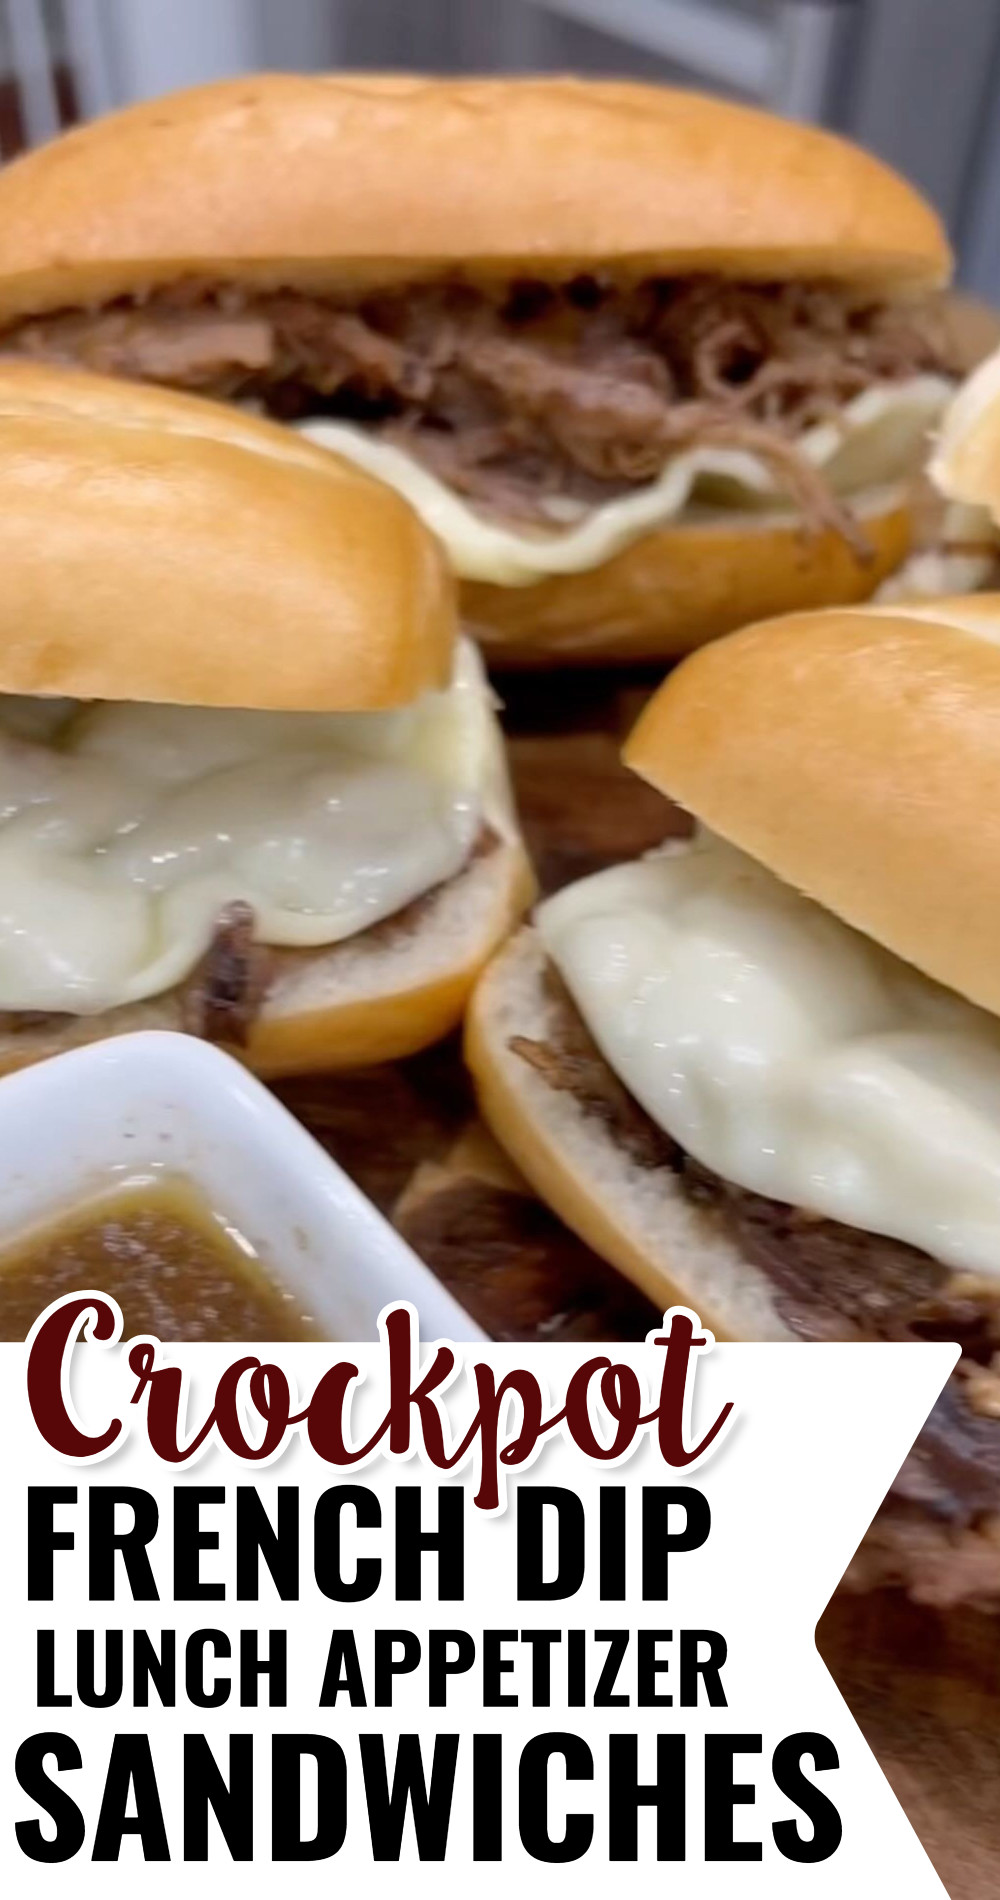 Crockpot French Dip lunch appetizer sandwiches